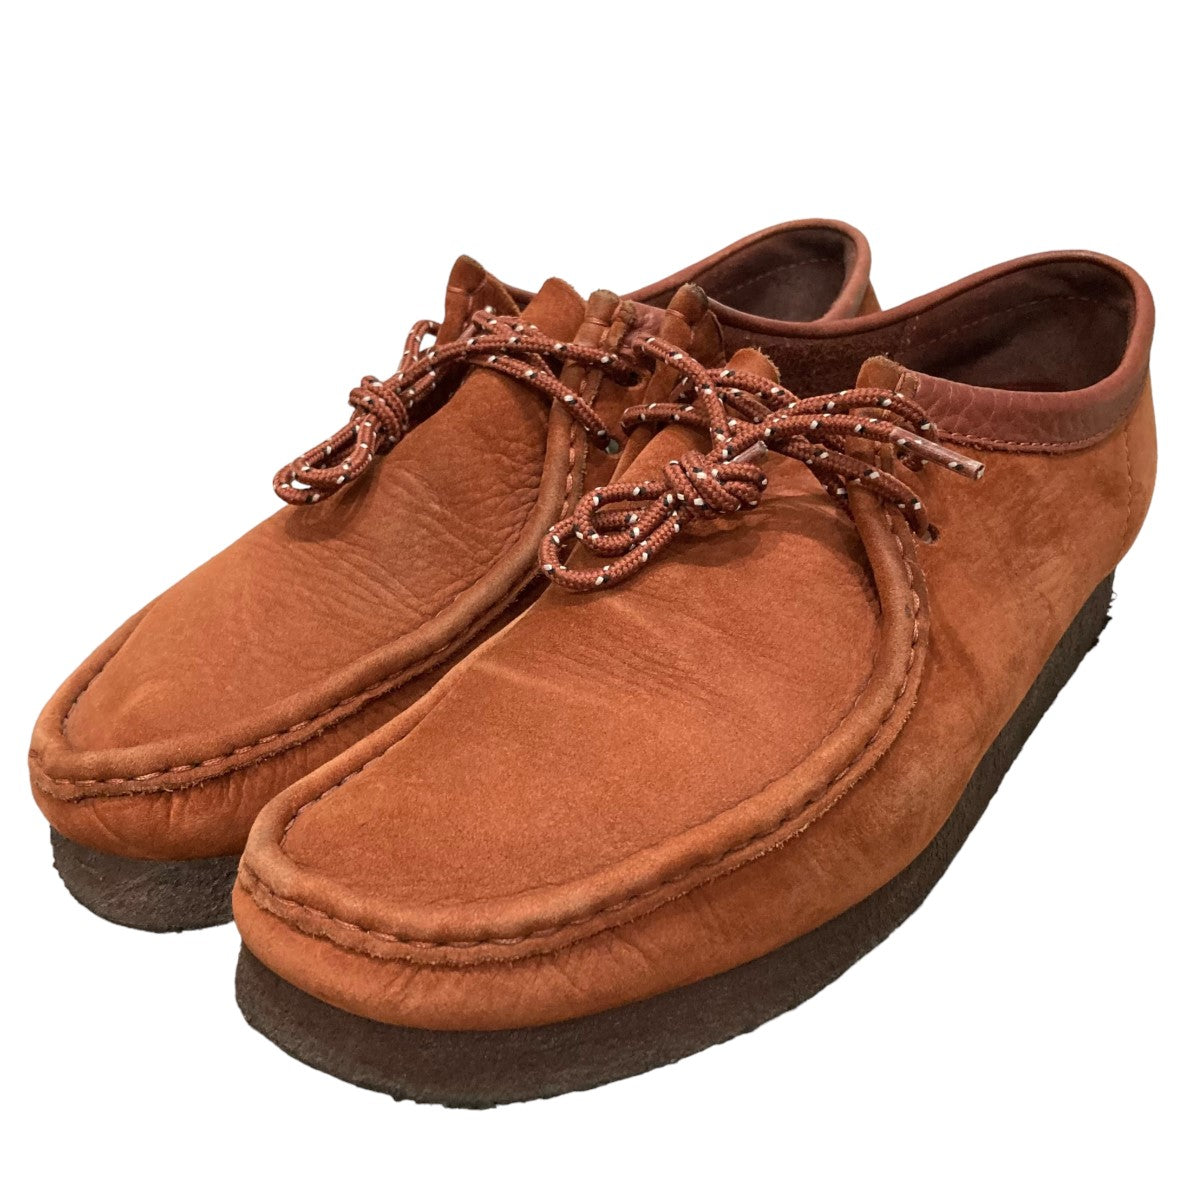 Clarks wallabee for beauty \u0026 youthではご購入させていただき ...